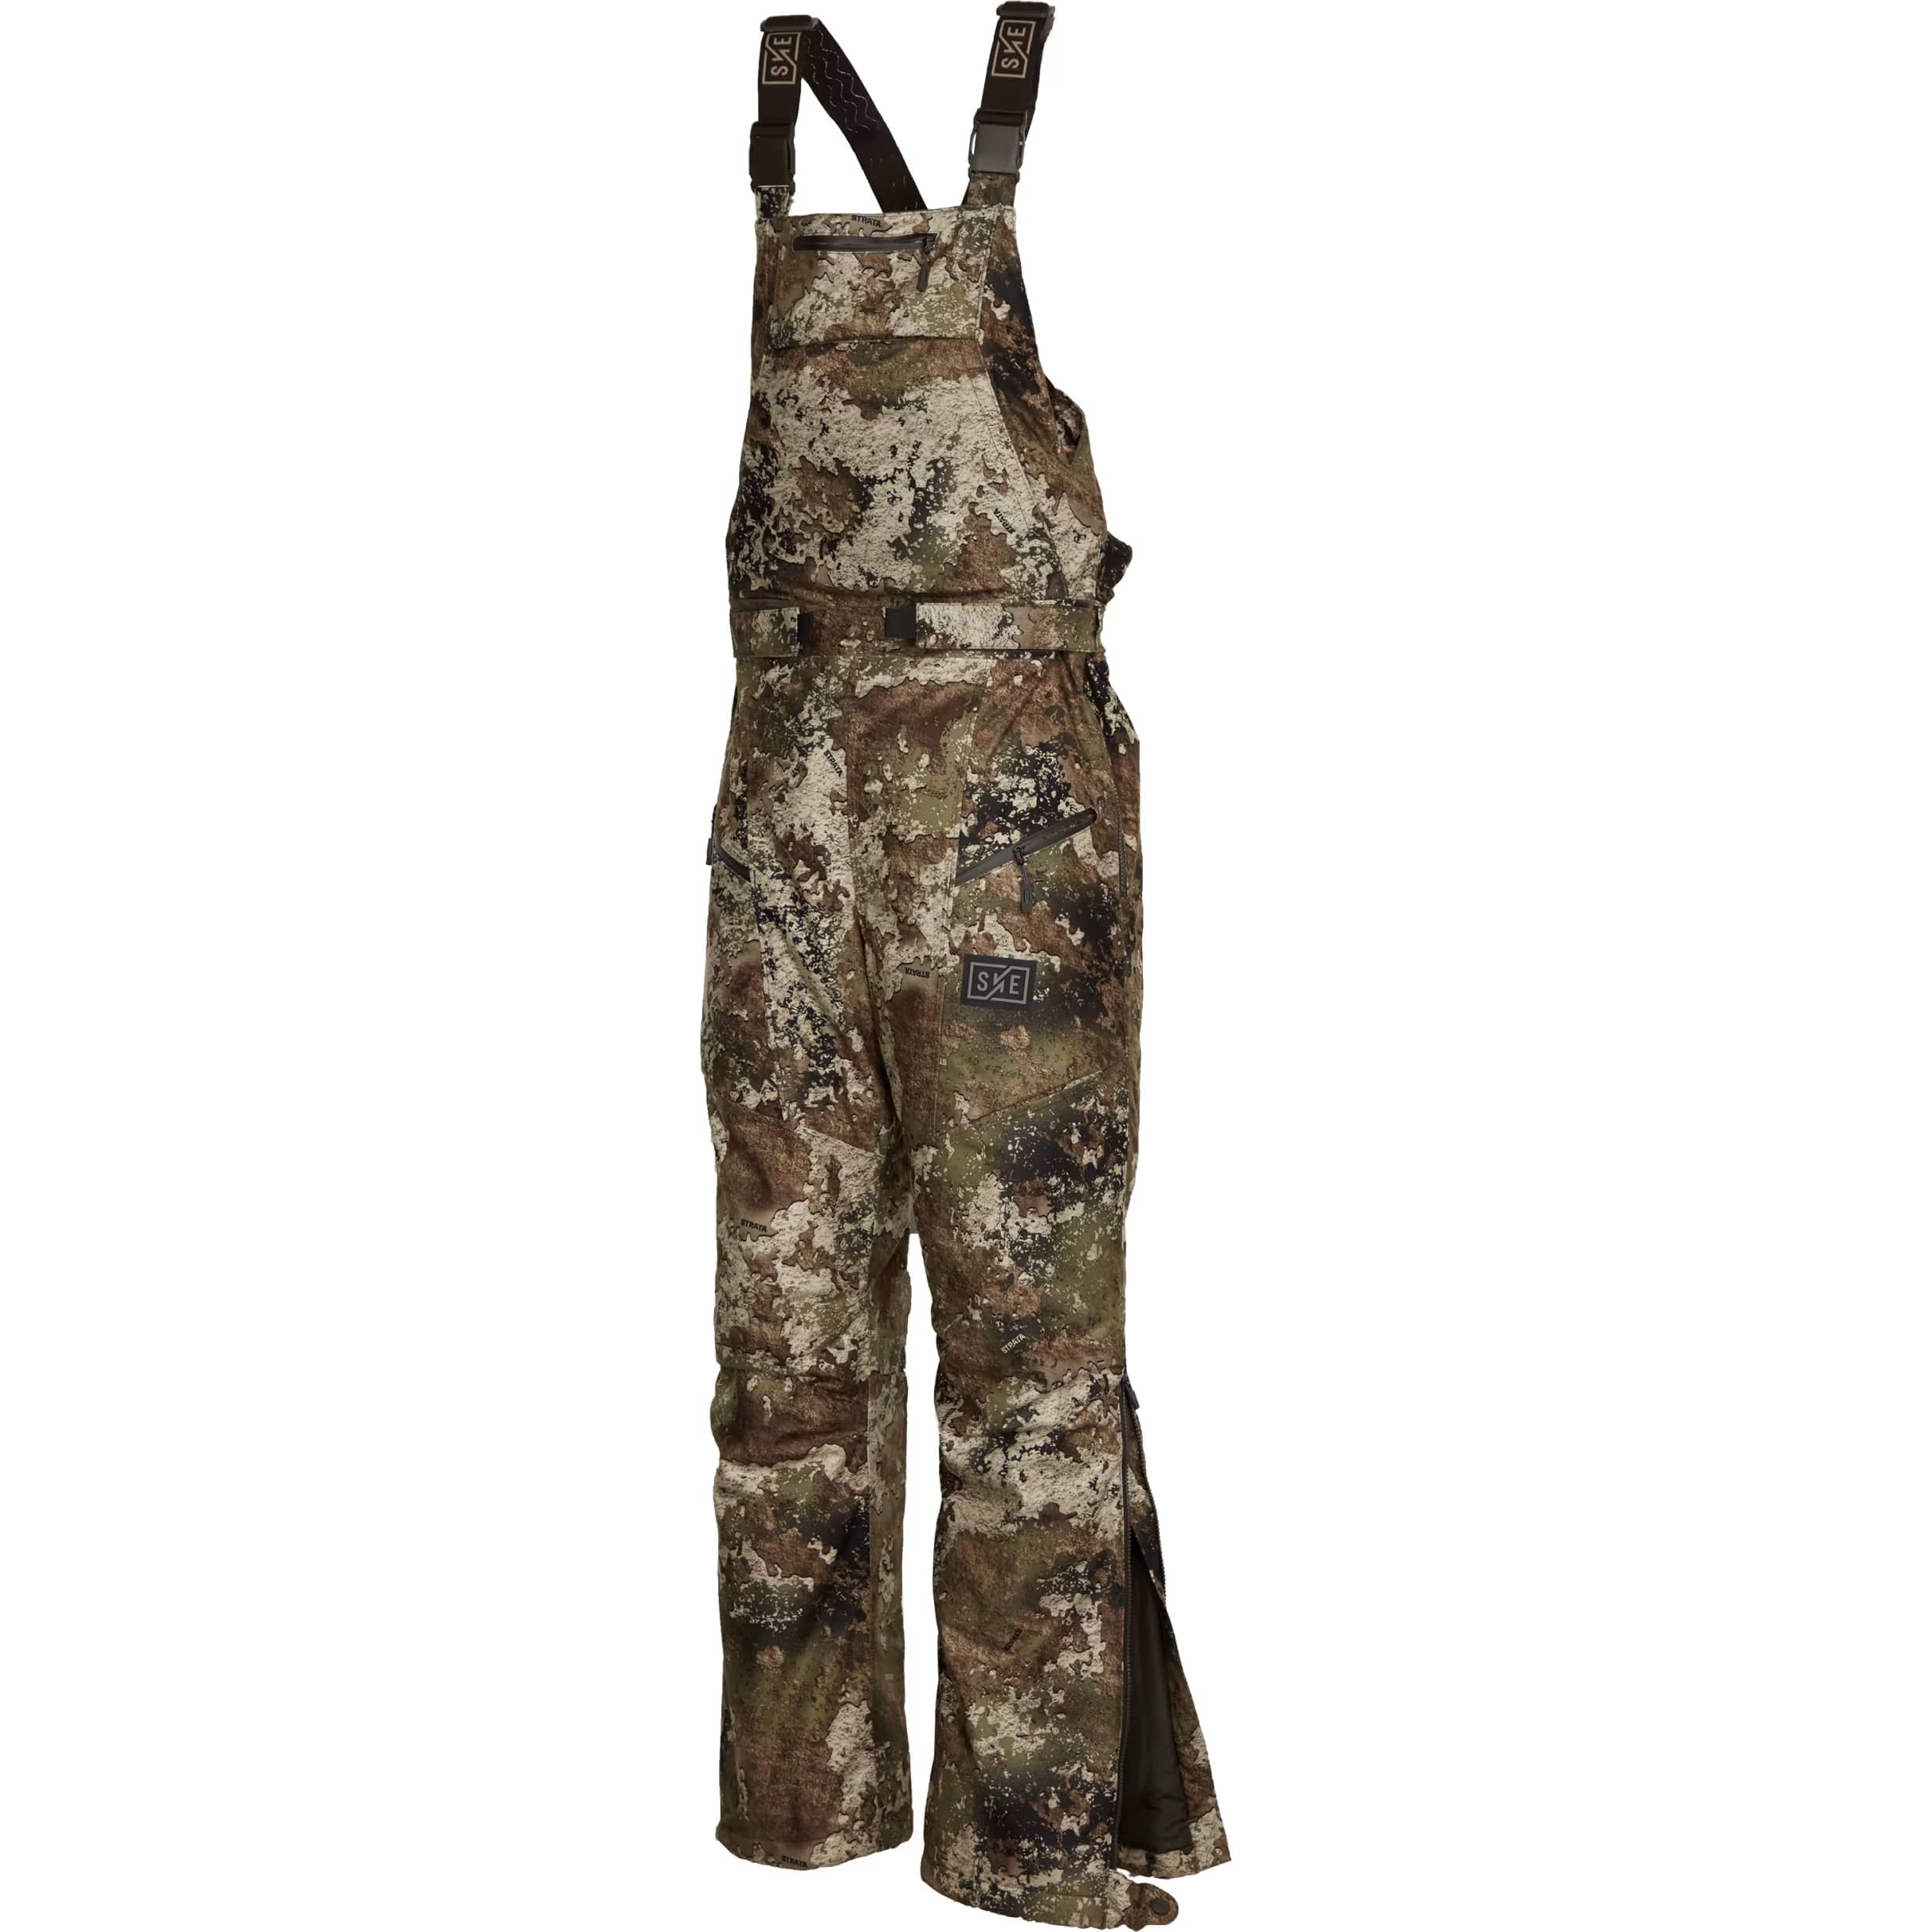 SHE Outdoor Waterfowl Bibs for Ladies